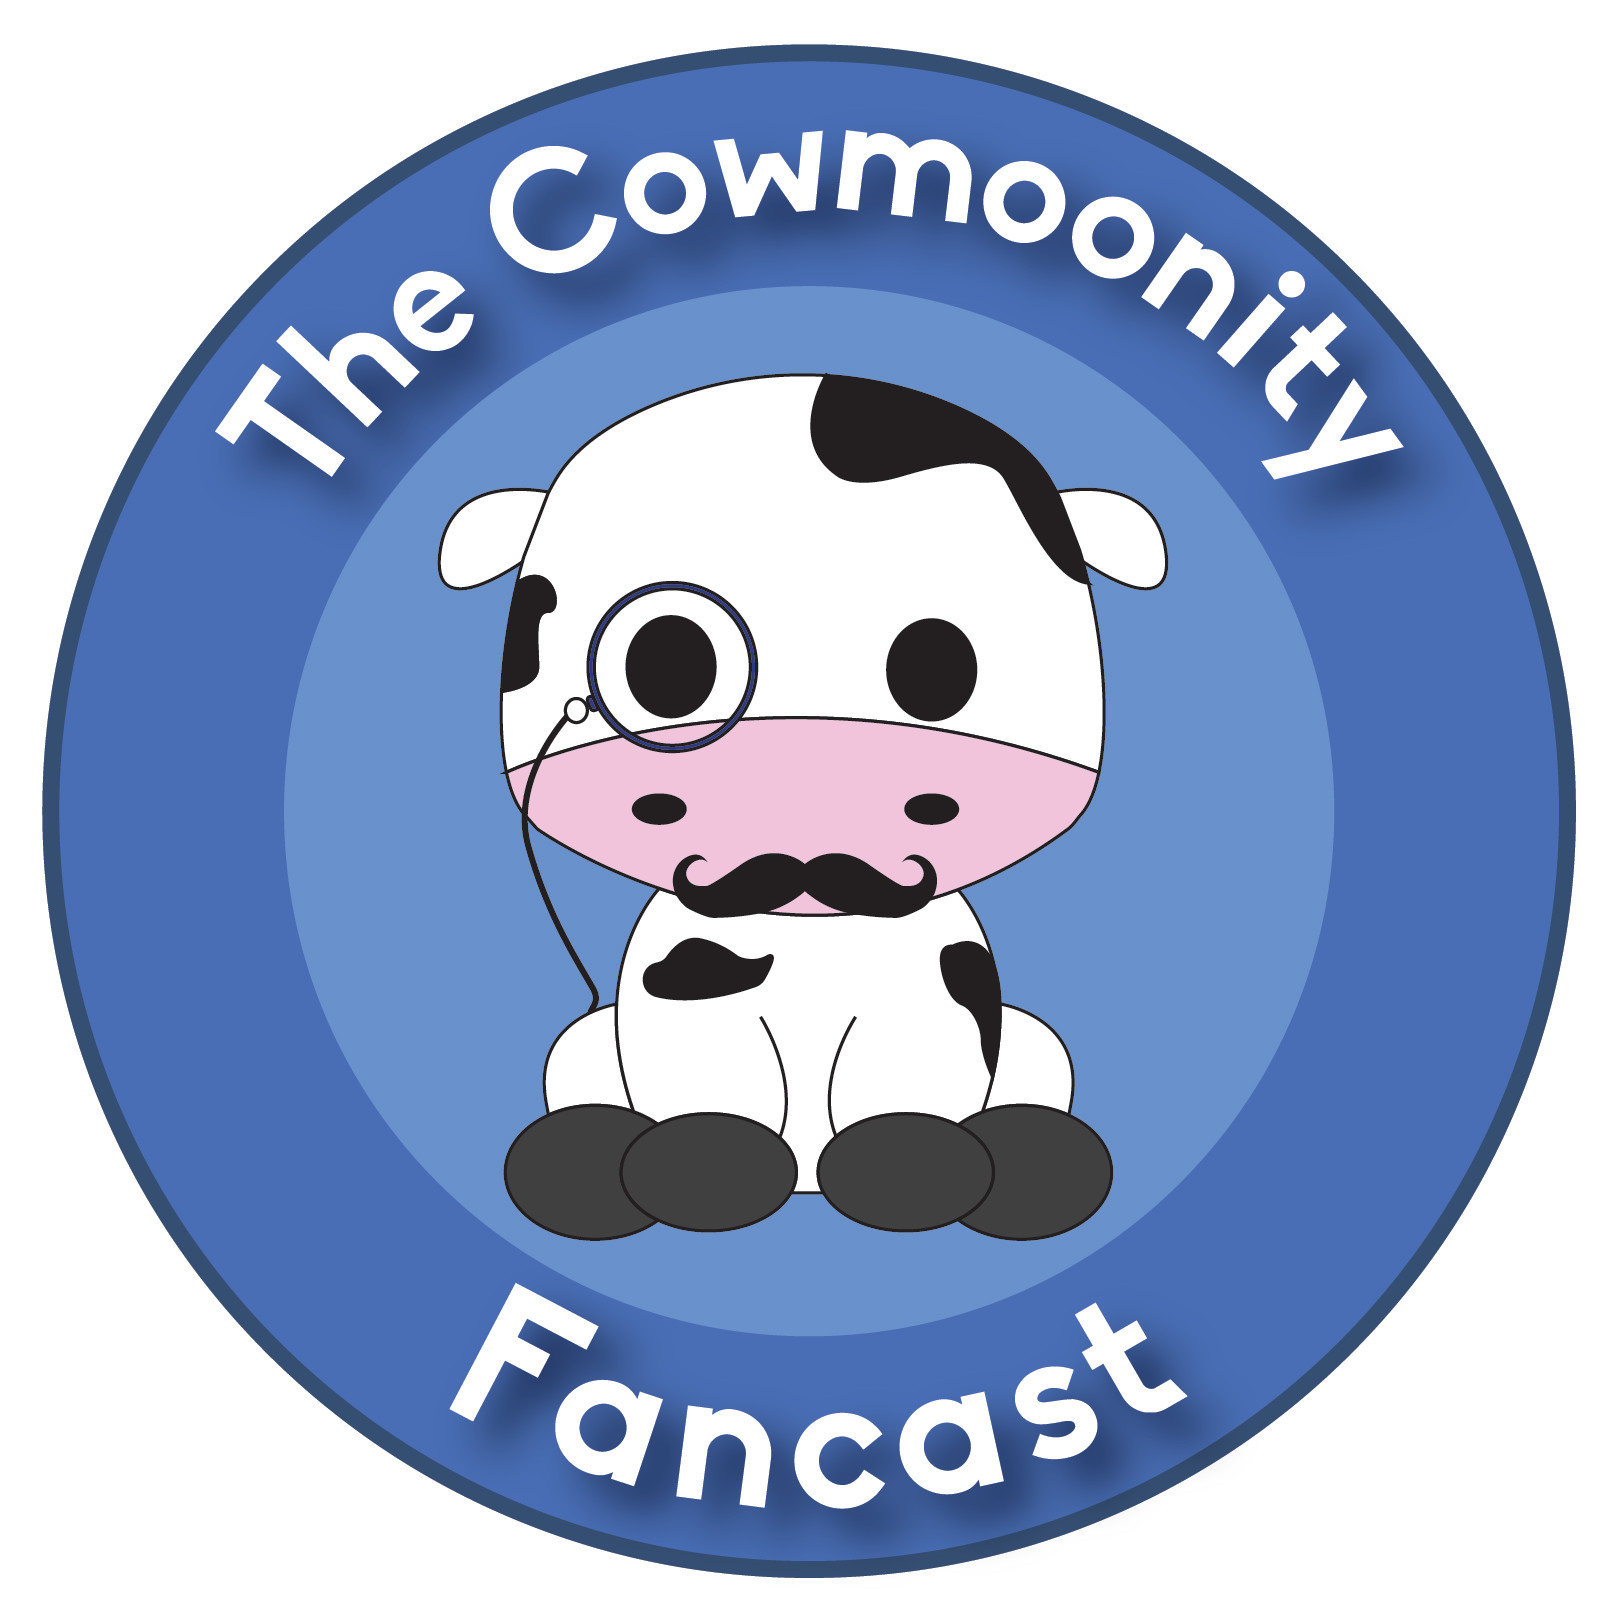 The Cowmoonity Fancast